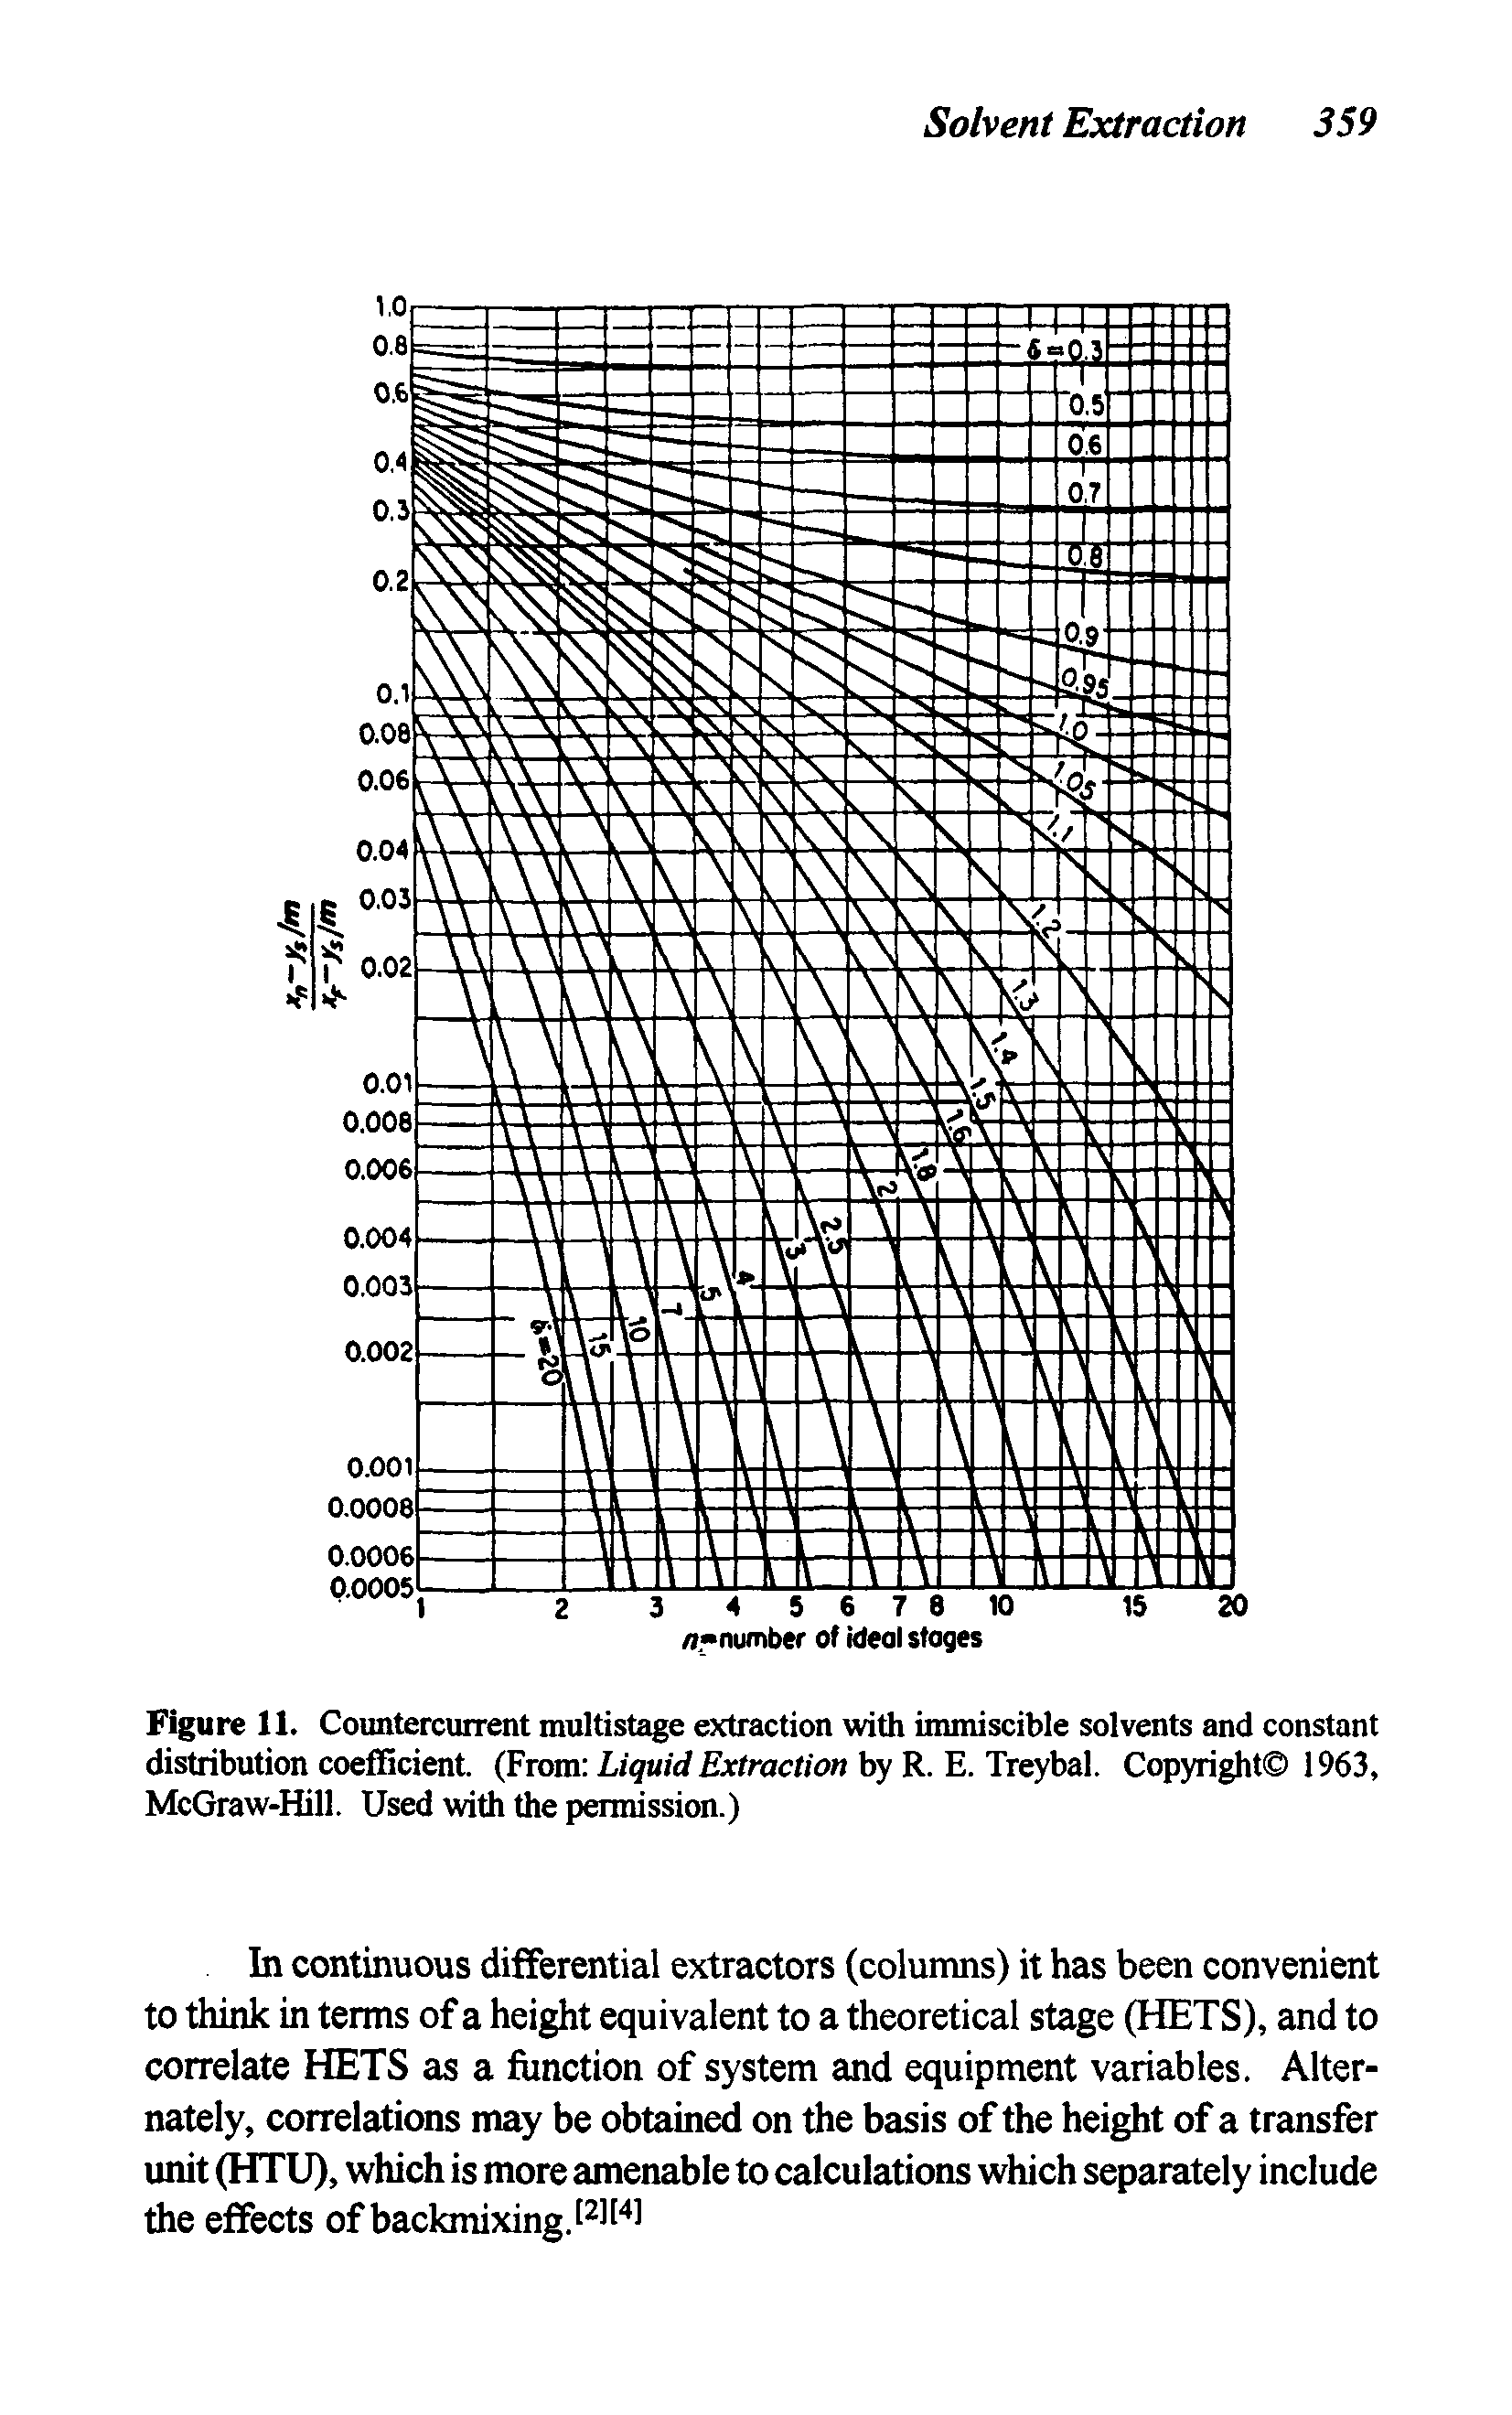 Figure 11. Countercurrent multistage extraction with immiscible solvents and constant distribution coefficient. (From firfrac/Zon by R. E. Treybal. Copyright 1963,...